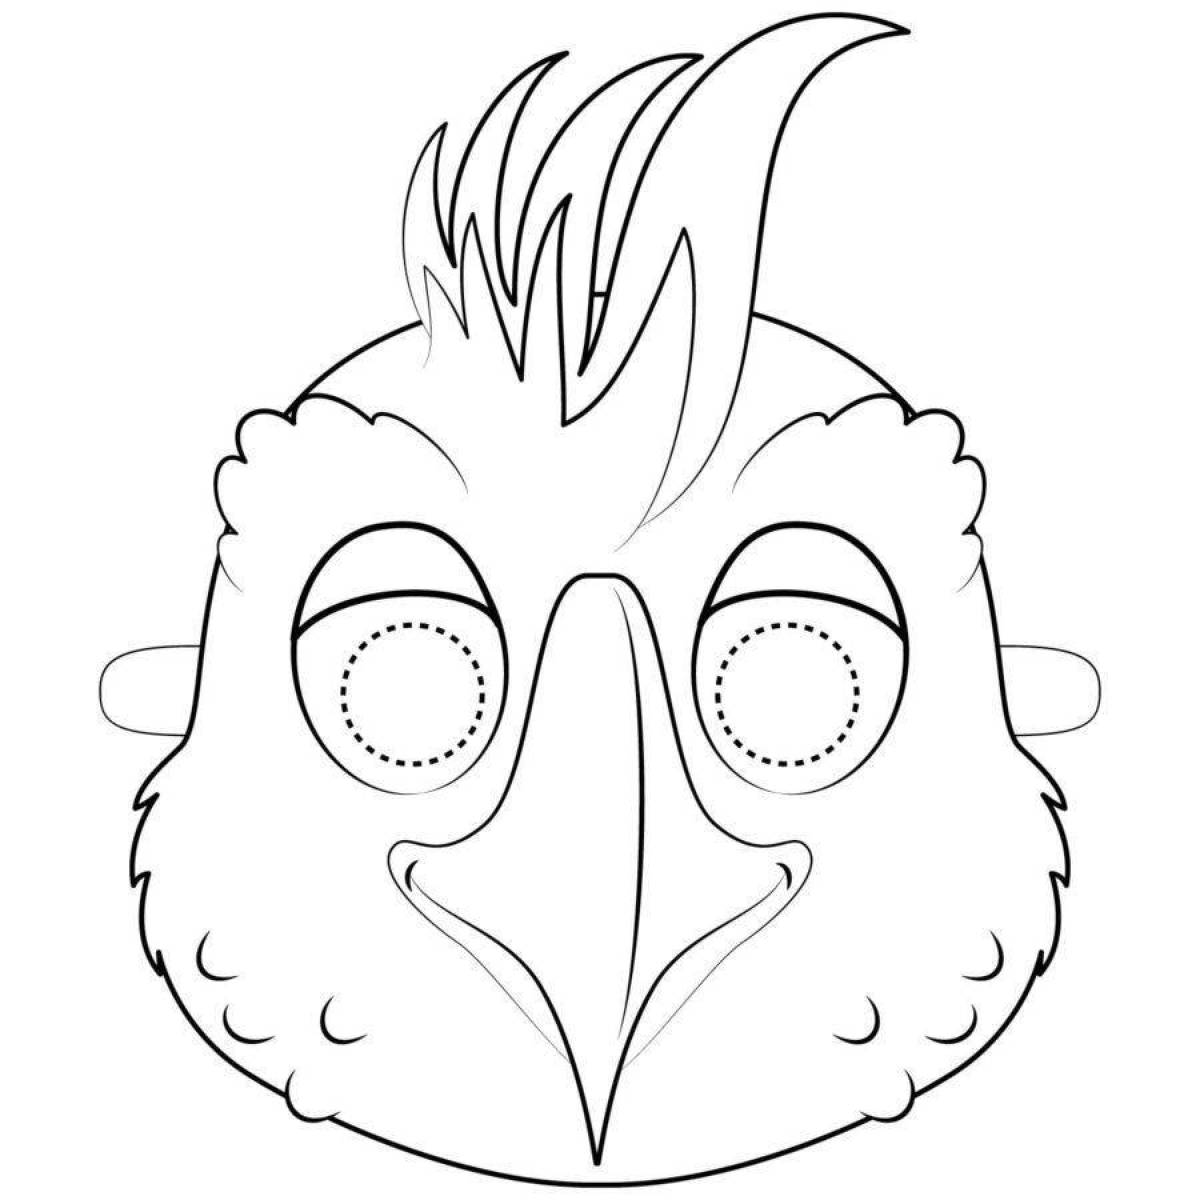 Awesome coloring pages for preschoolers with masks